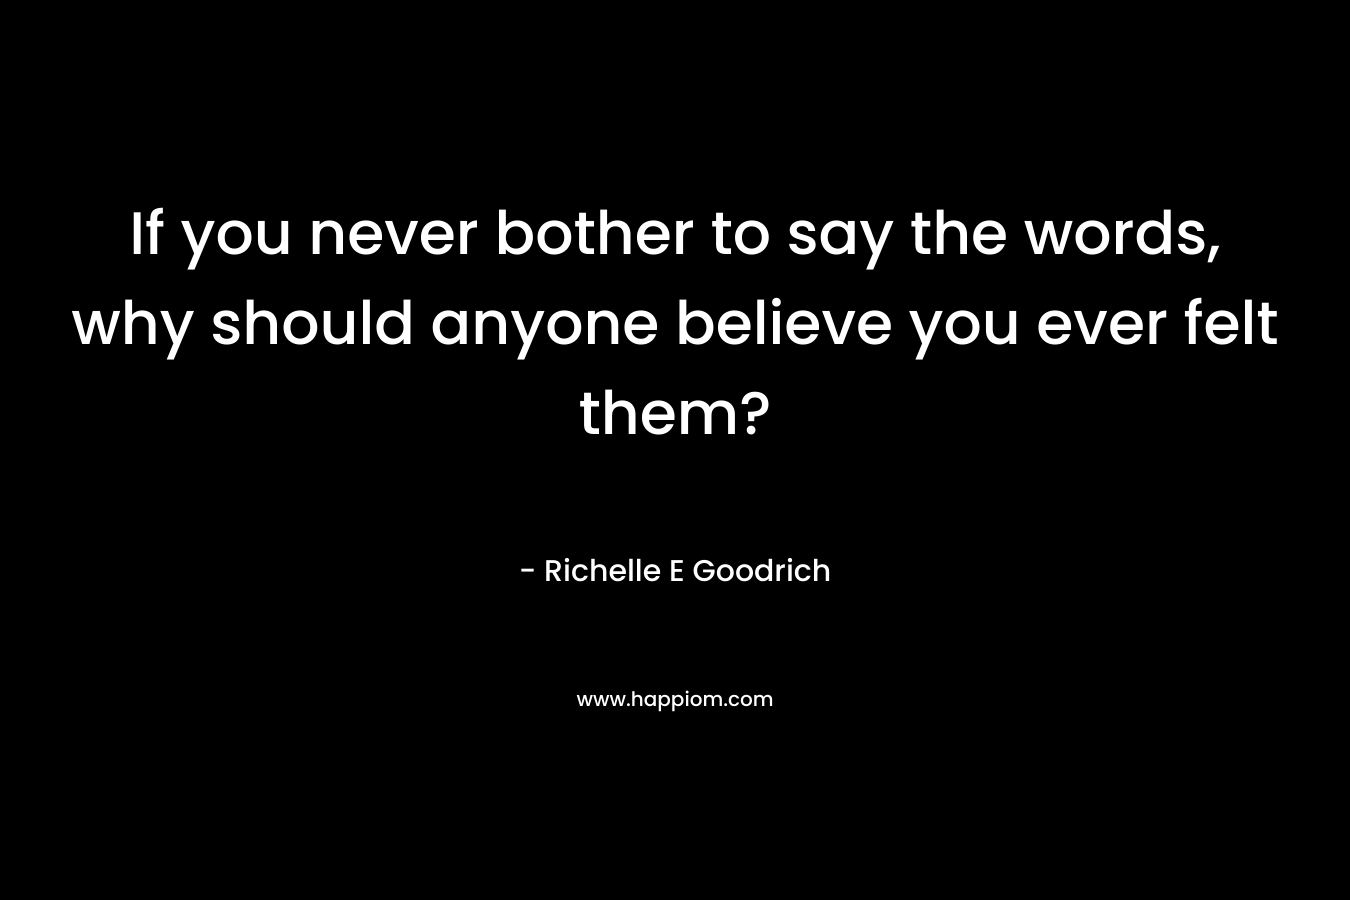 If you never bother to say the words, why should anyone believe you ever felt them?